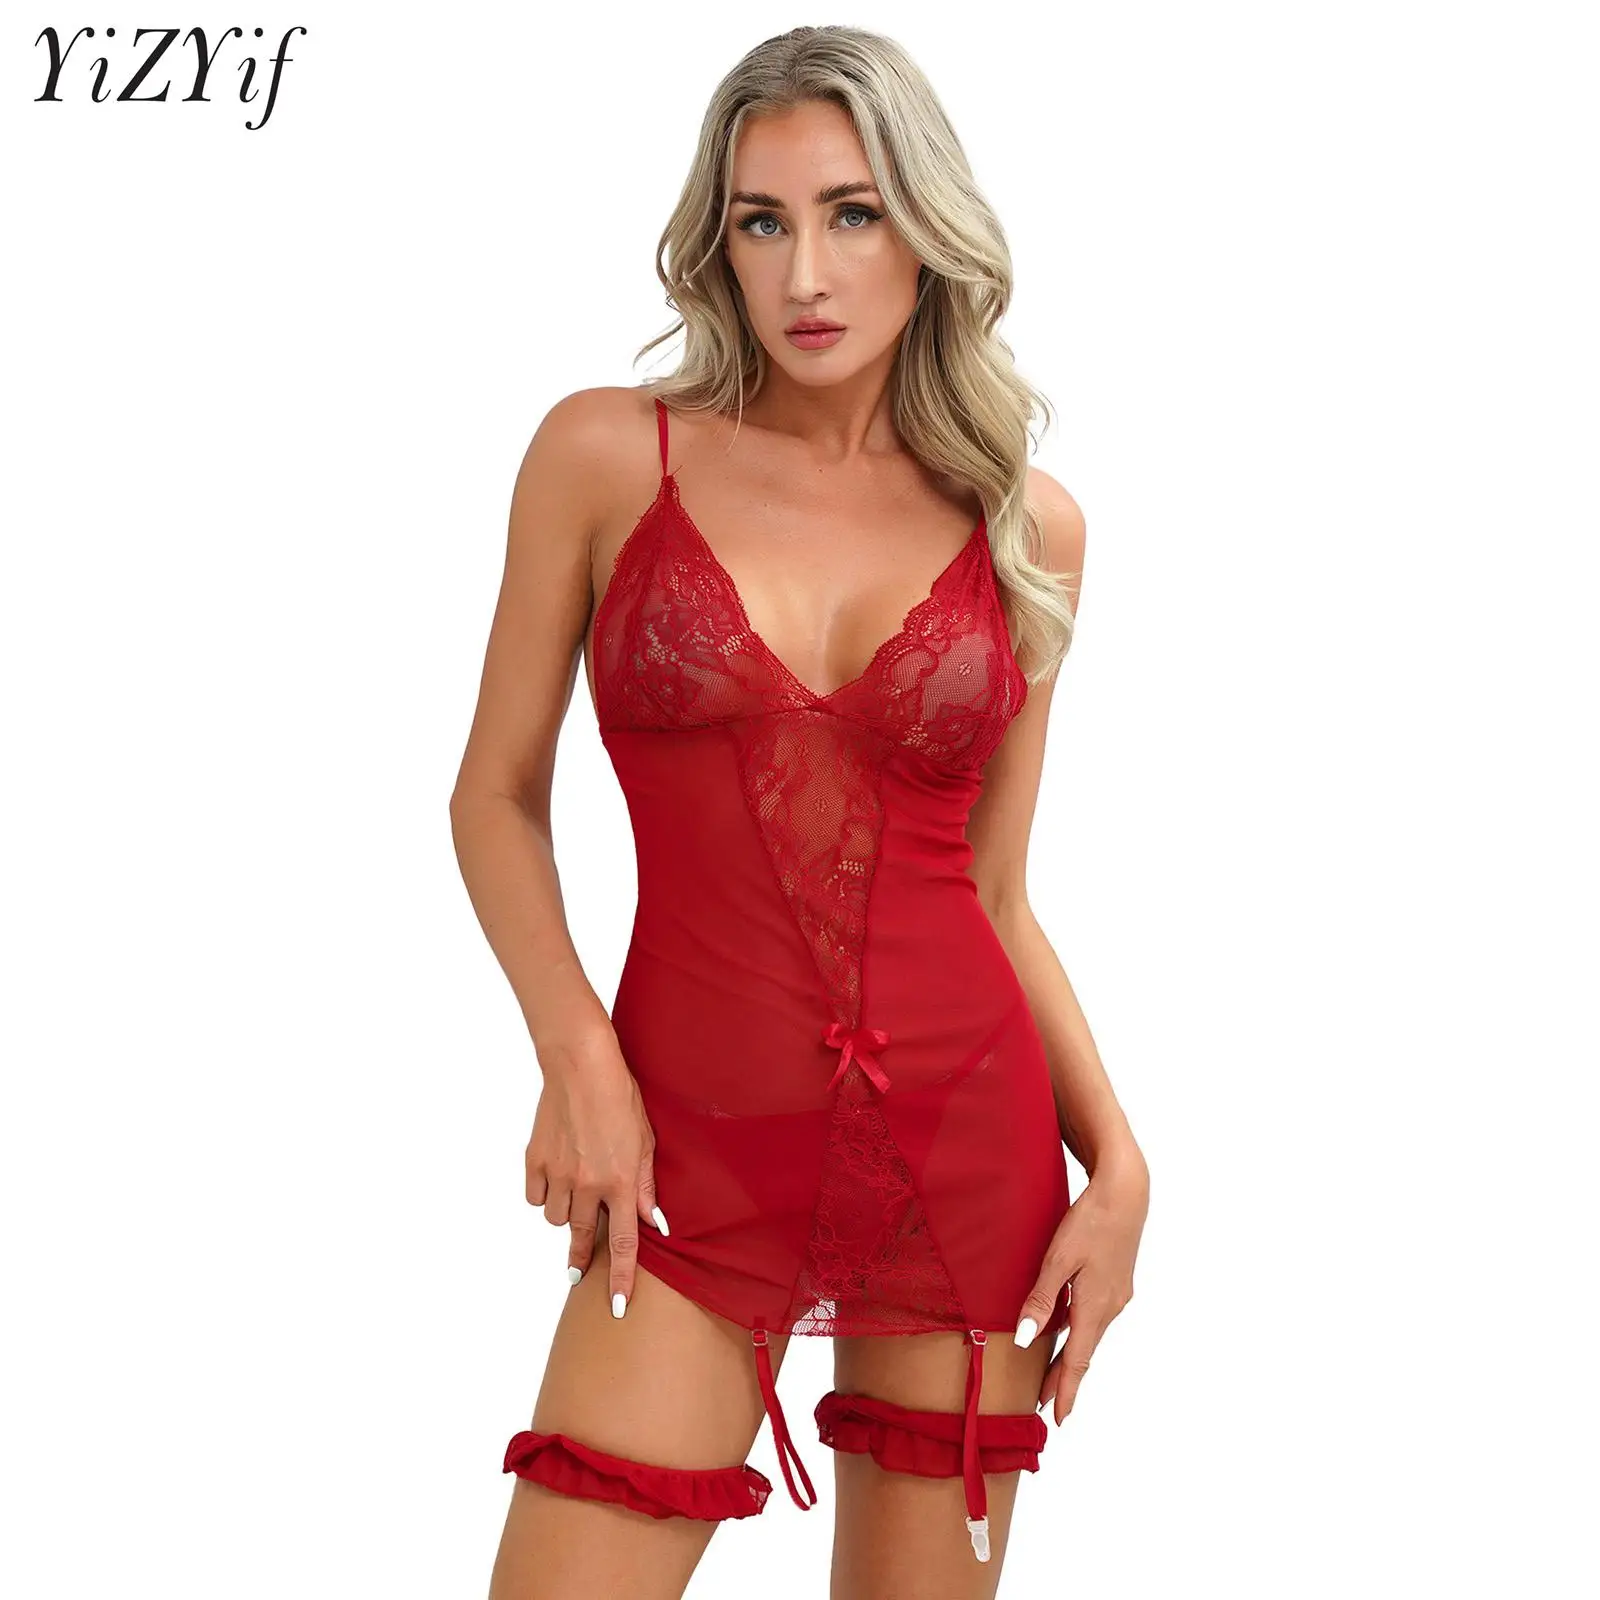 

Women Sexy See-Through Lace Lingerie Set Teddy Mini Bodycon Dress V Neck Strappy Chemise with Thong and Leg Ring Pajamas Outfit